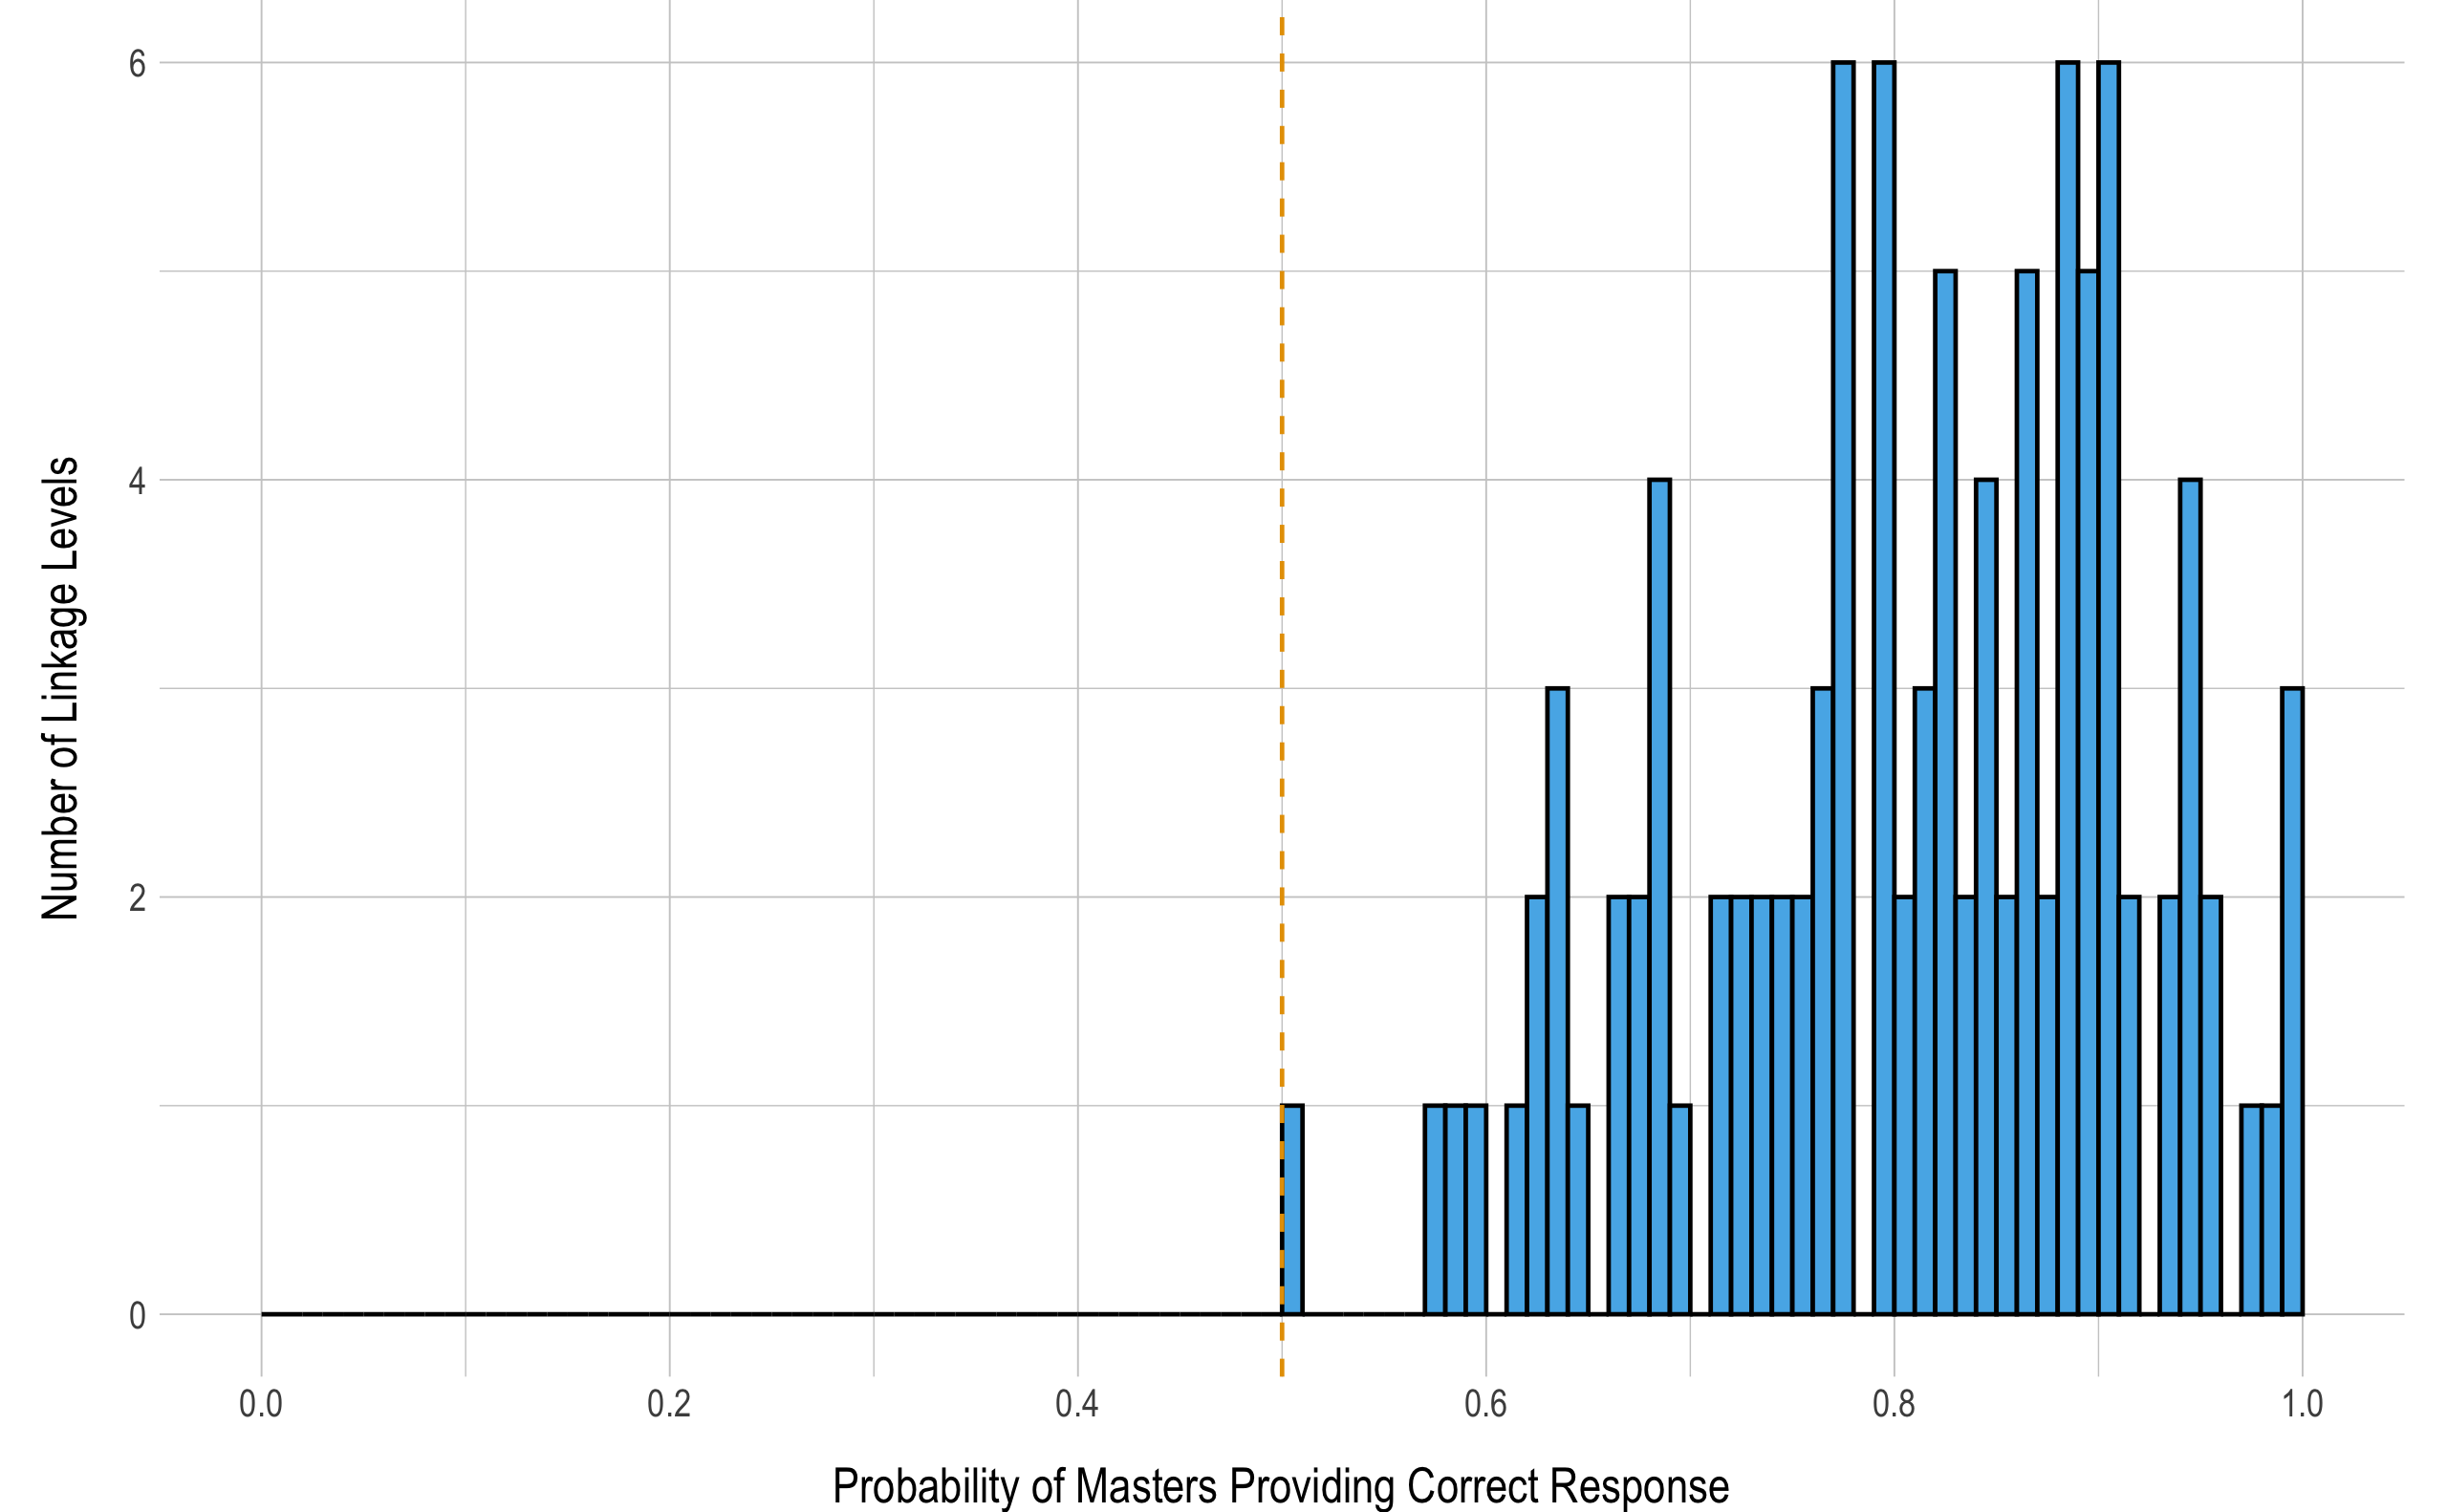 Probability of Masters Providing a Correct Response to Items Measuring Each Linkage Level